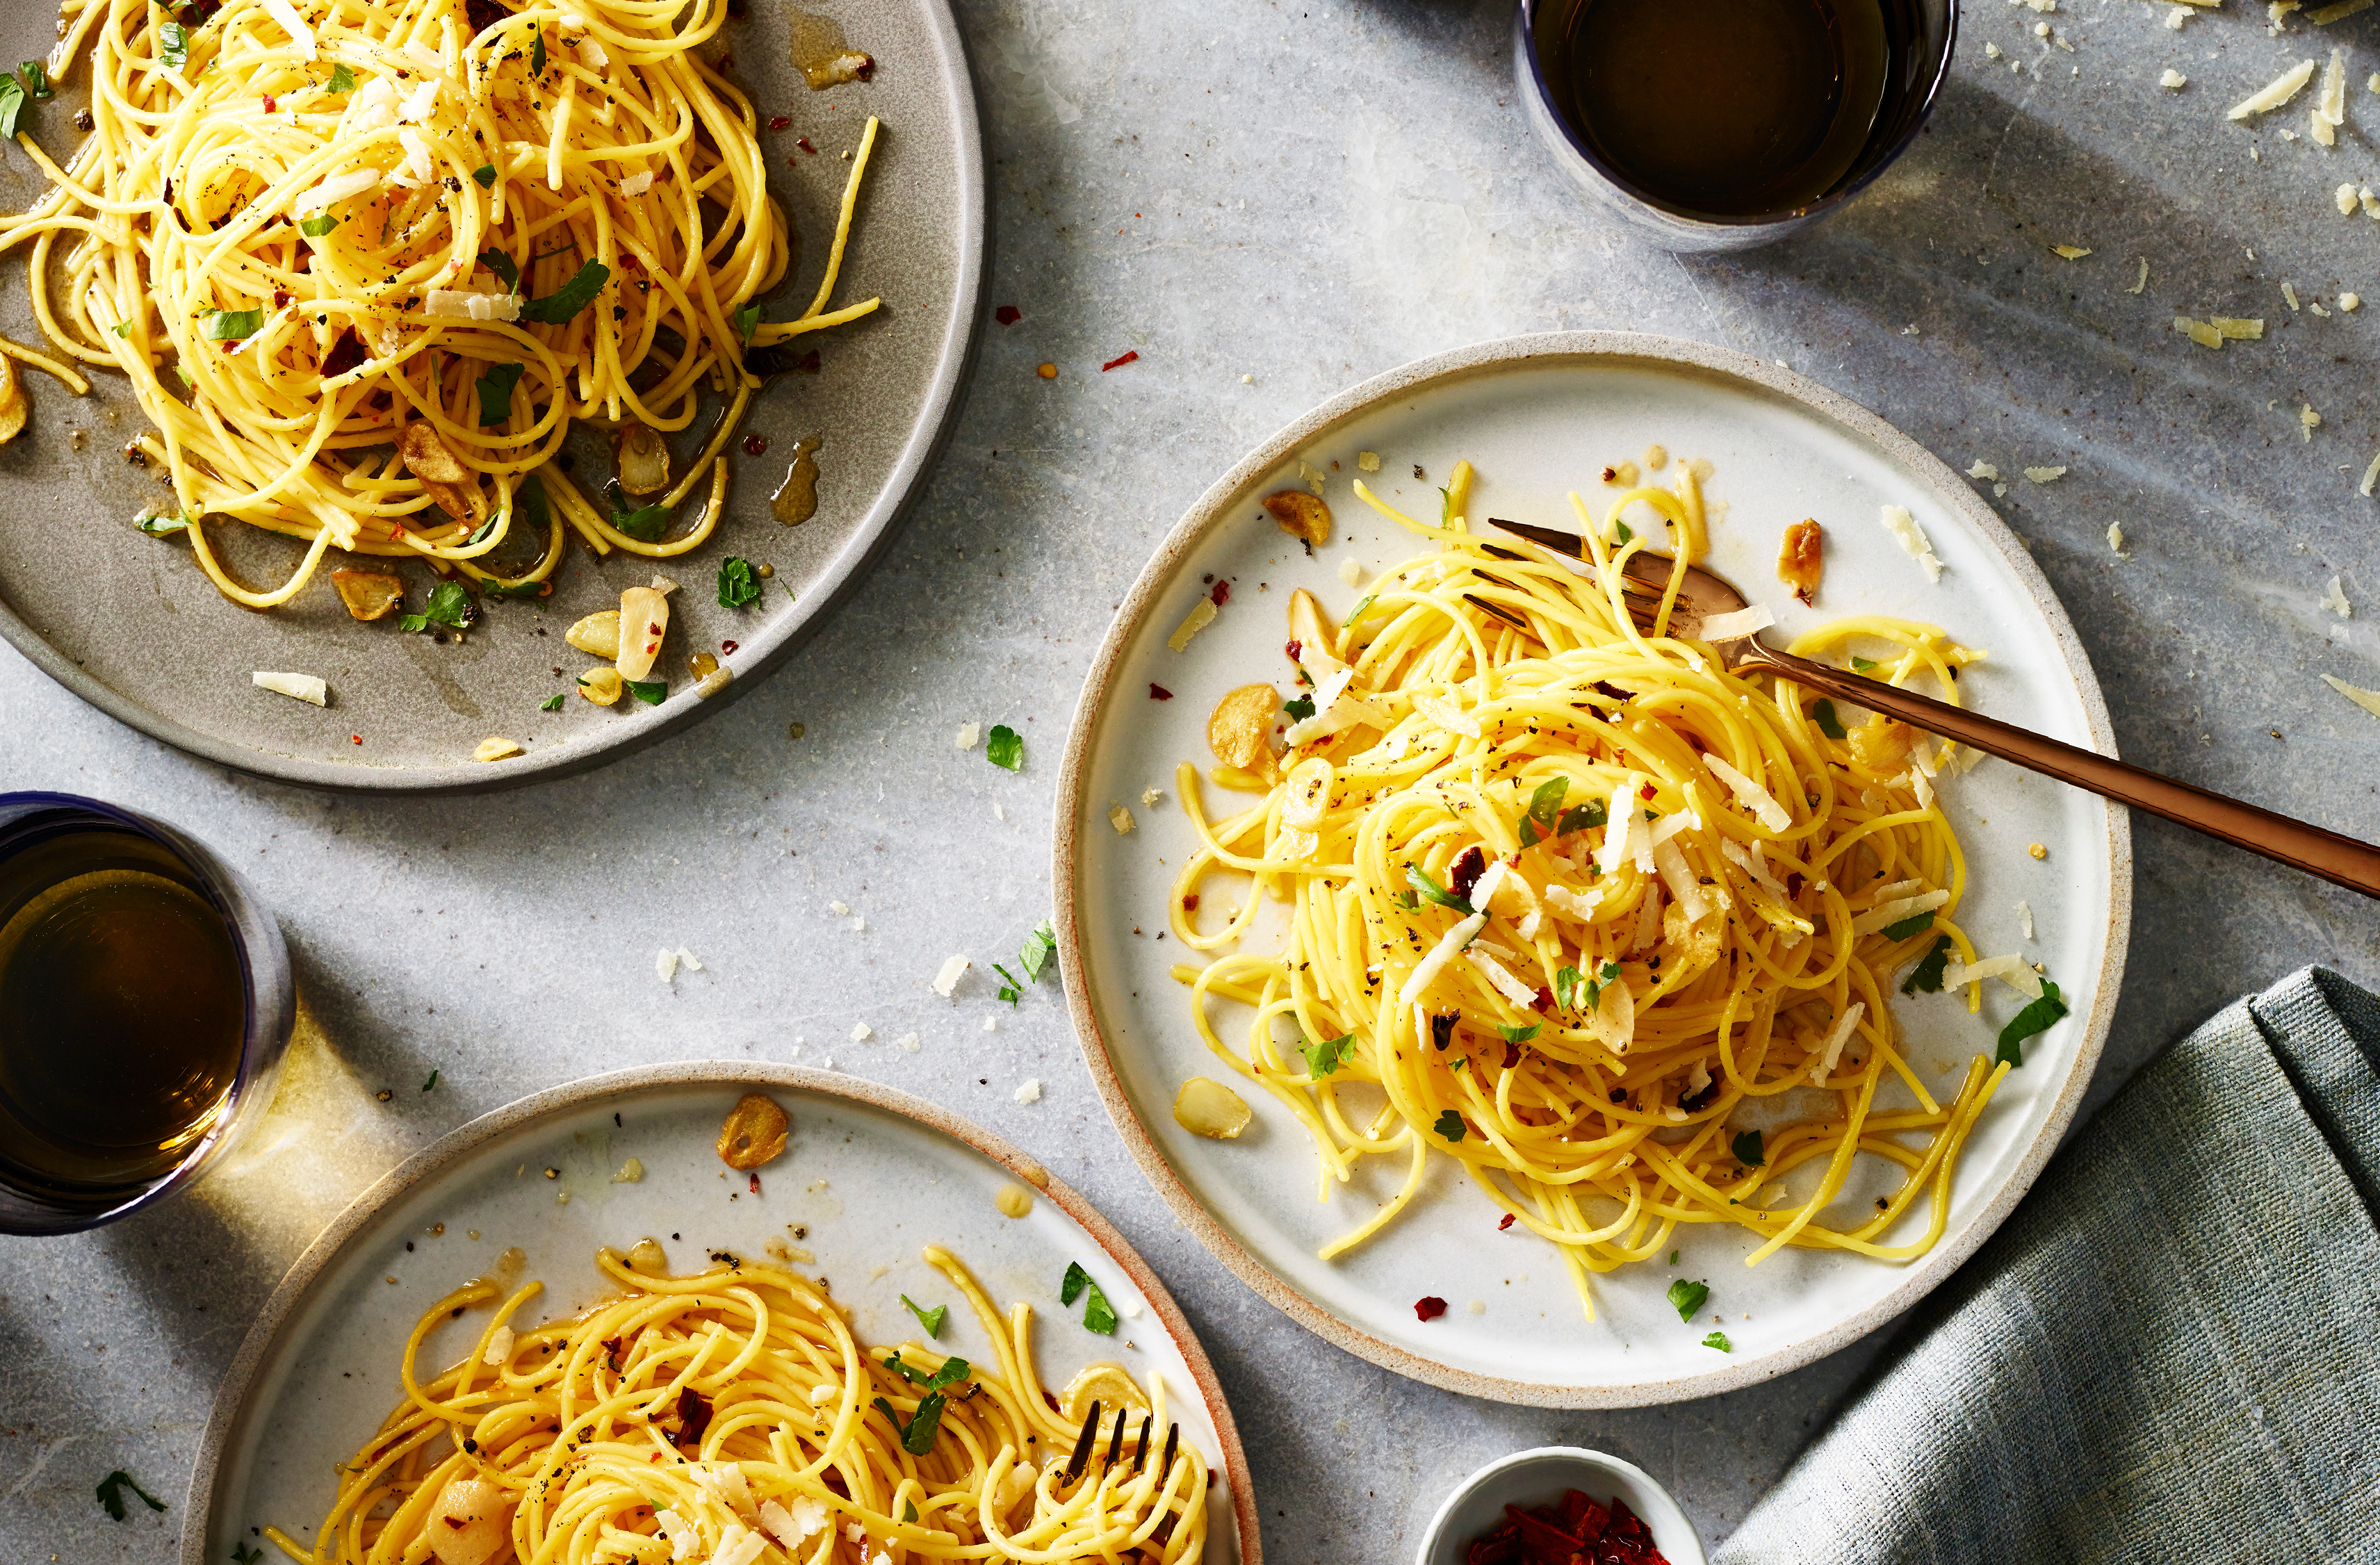 Three plates of spaghetti tossed with garlic oil and cheese
